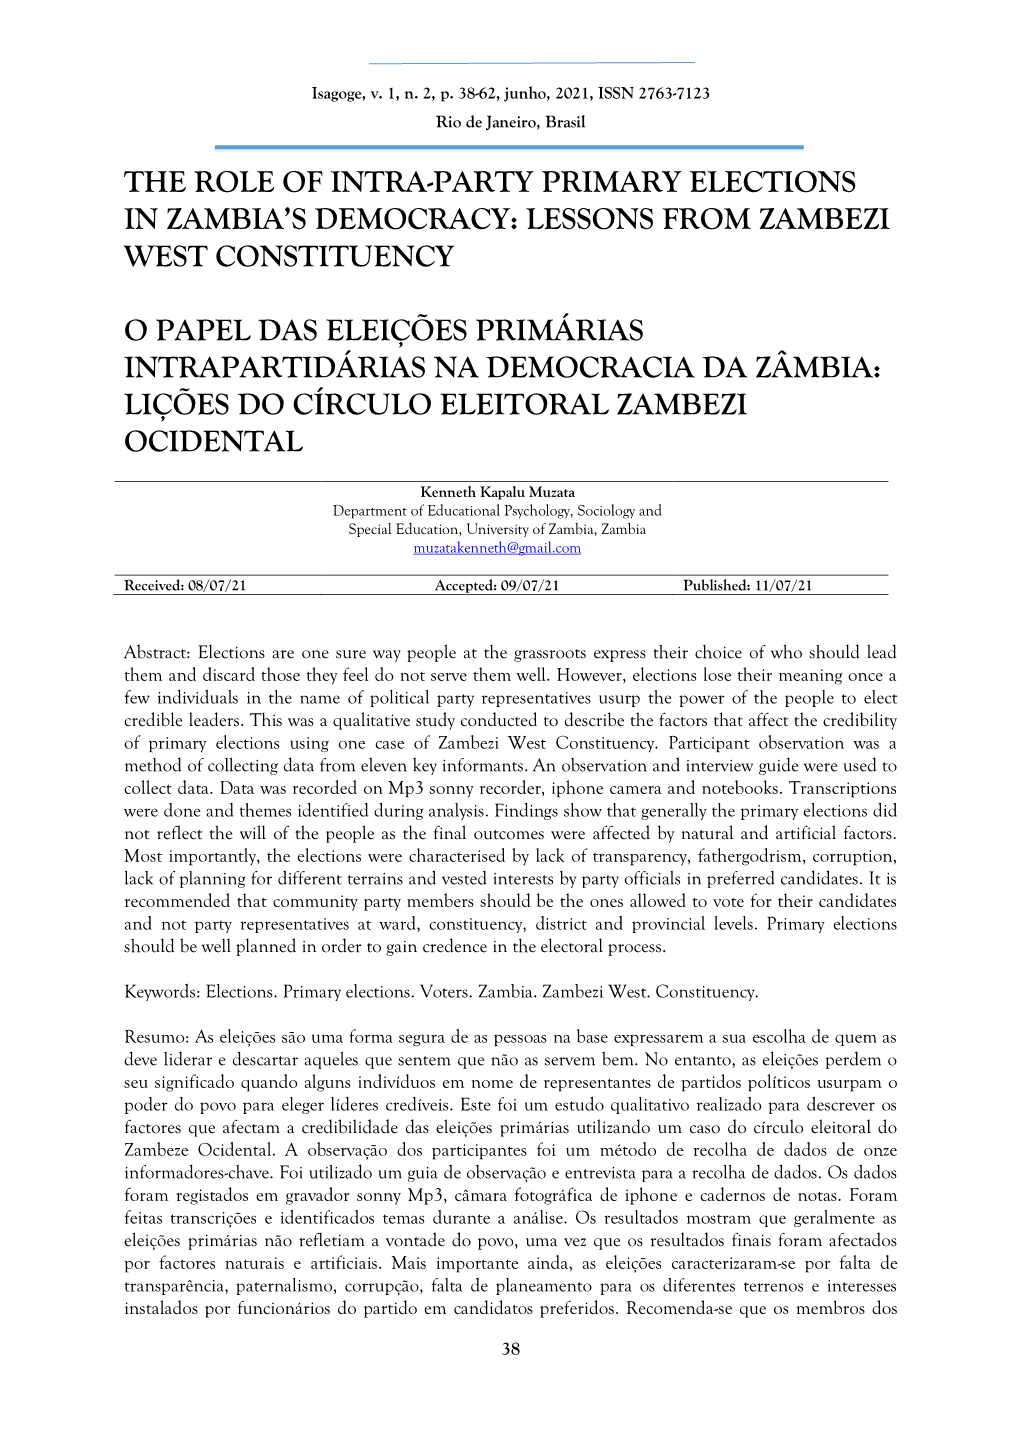 The Role of Intra-Party Primary Elections in Zambia’S Democracy: Lessons from Zambezi West Constituency